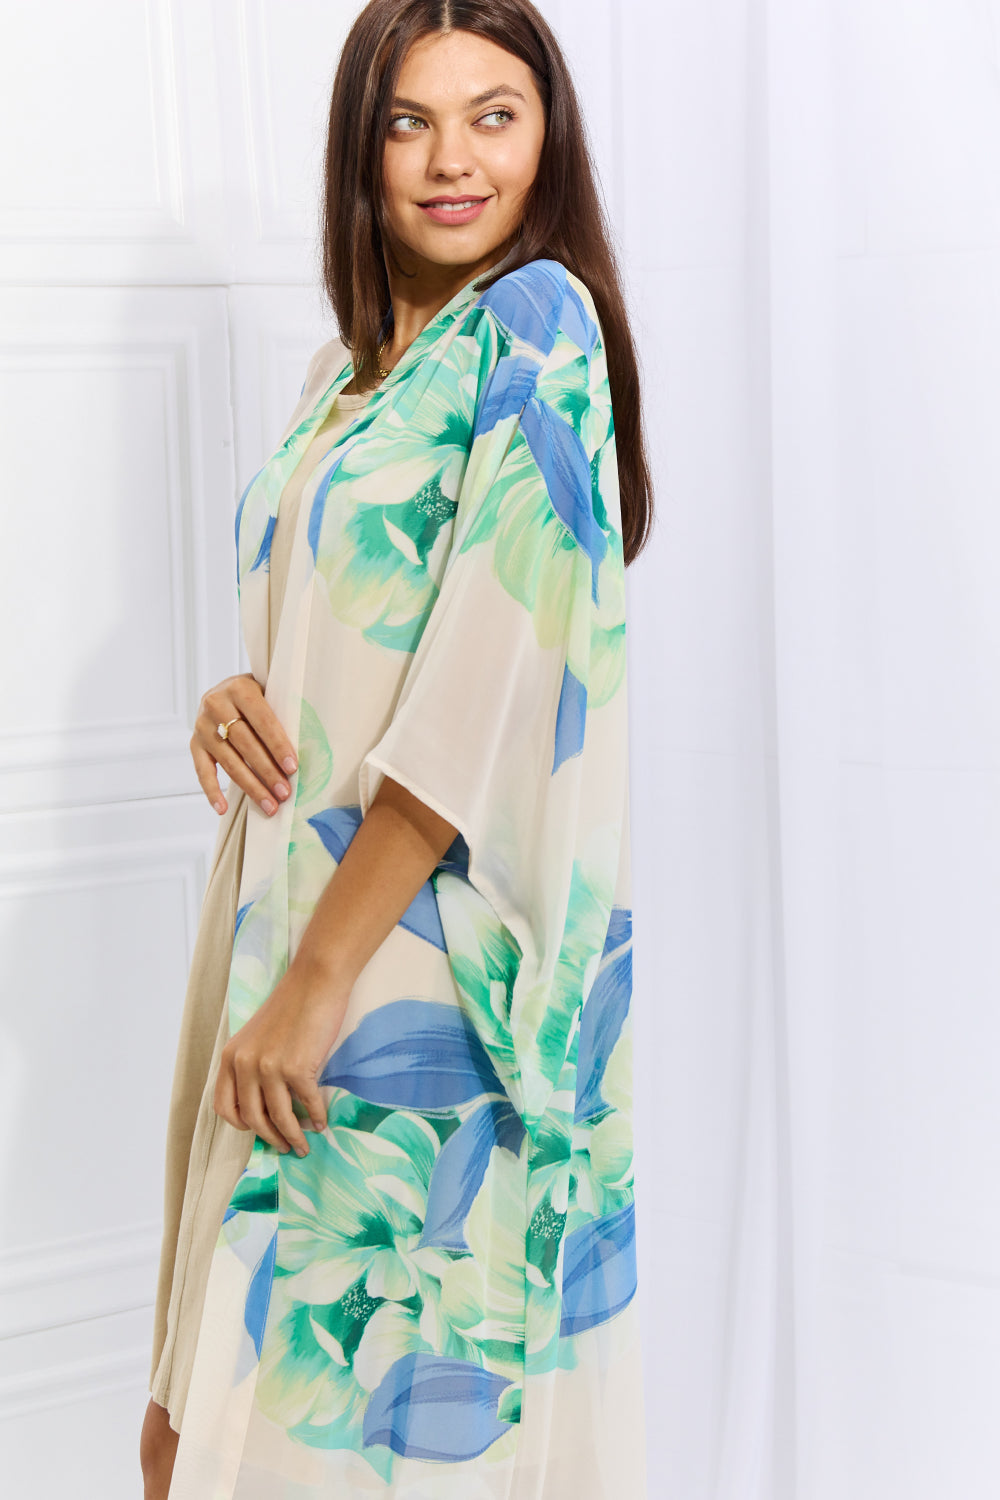 On the Go Floral Kimono - Coco and lulu boutique 